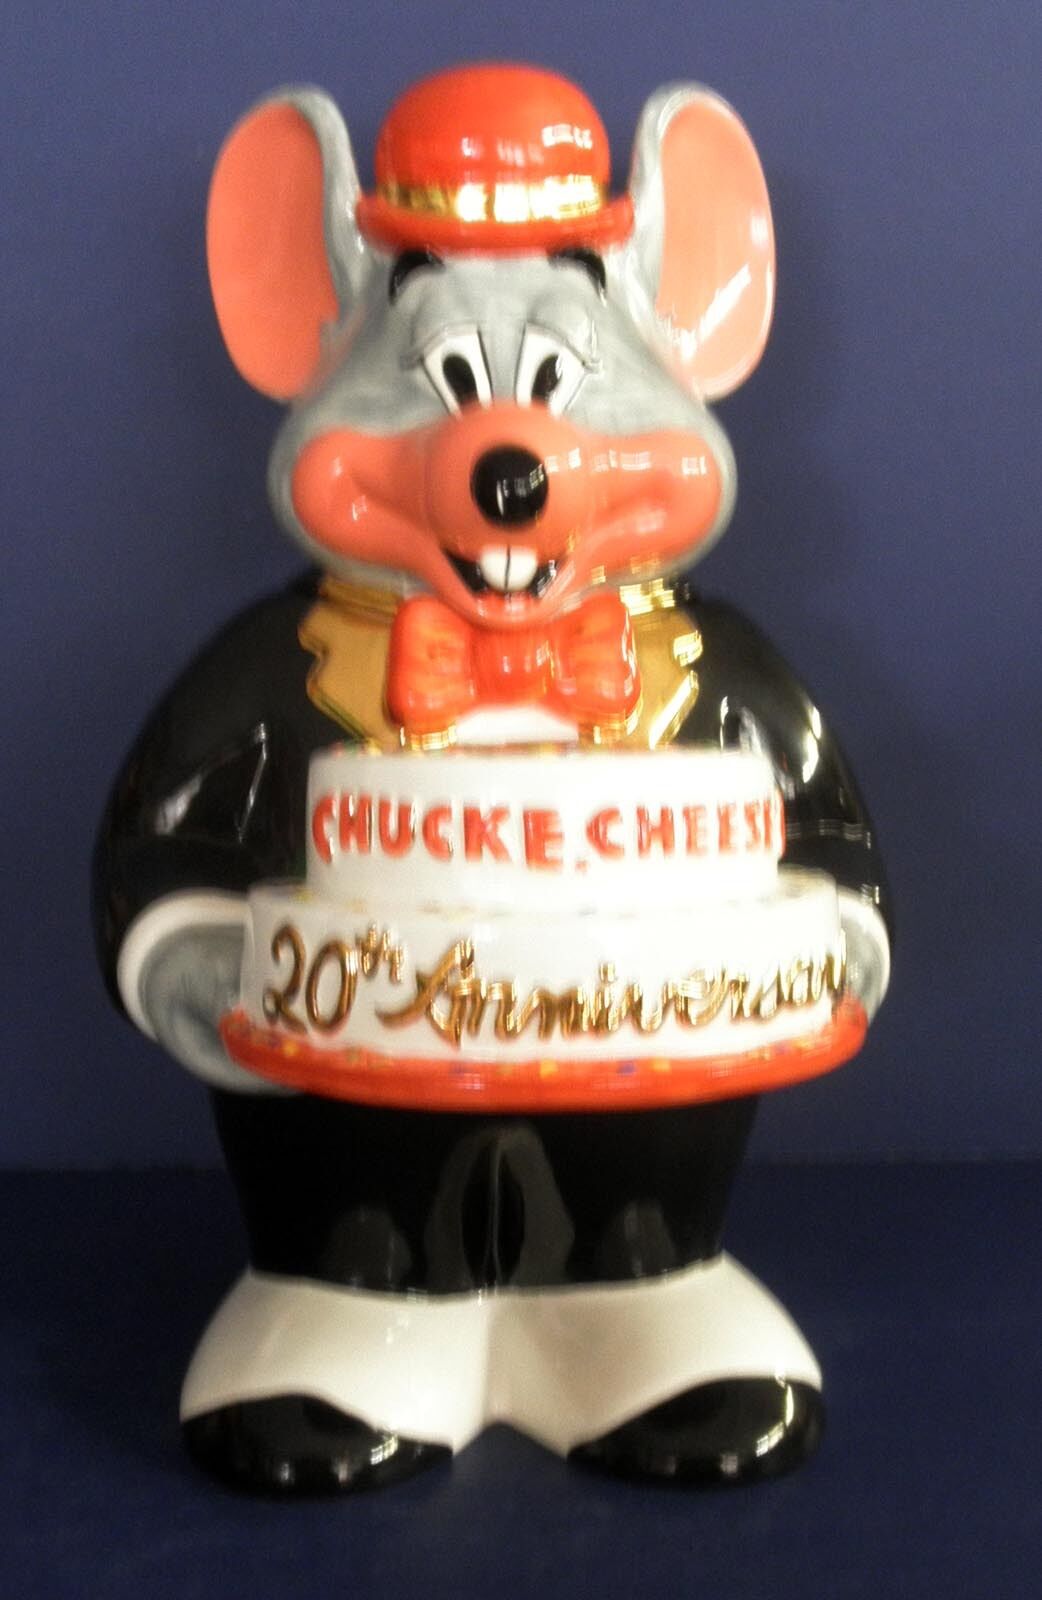 Chuck E. Cheese 20th Anniversary Cookie Jar: L.E. of 1997   - from 1997